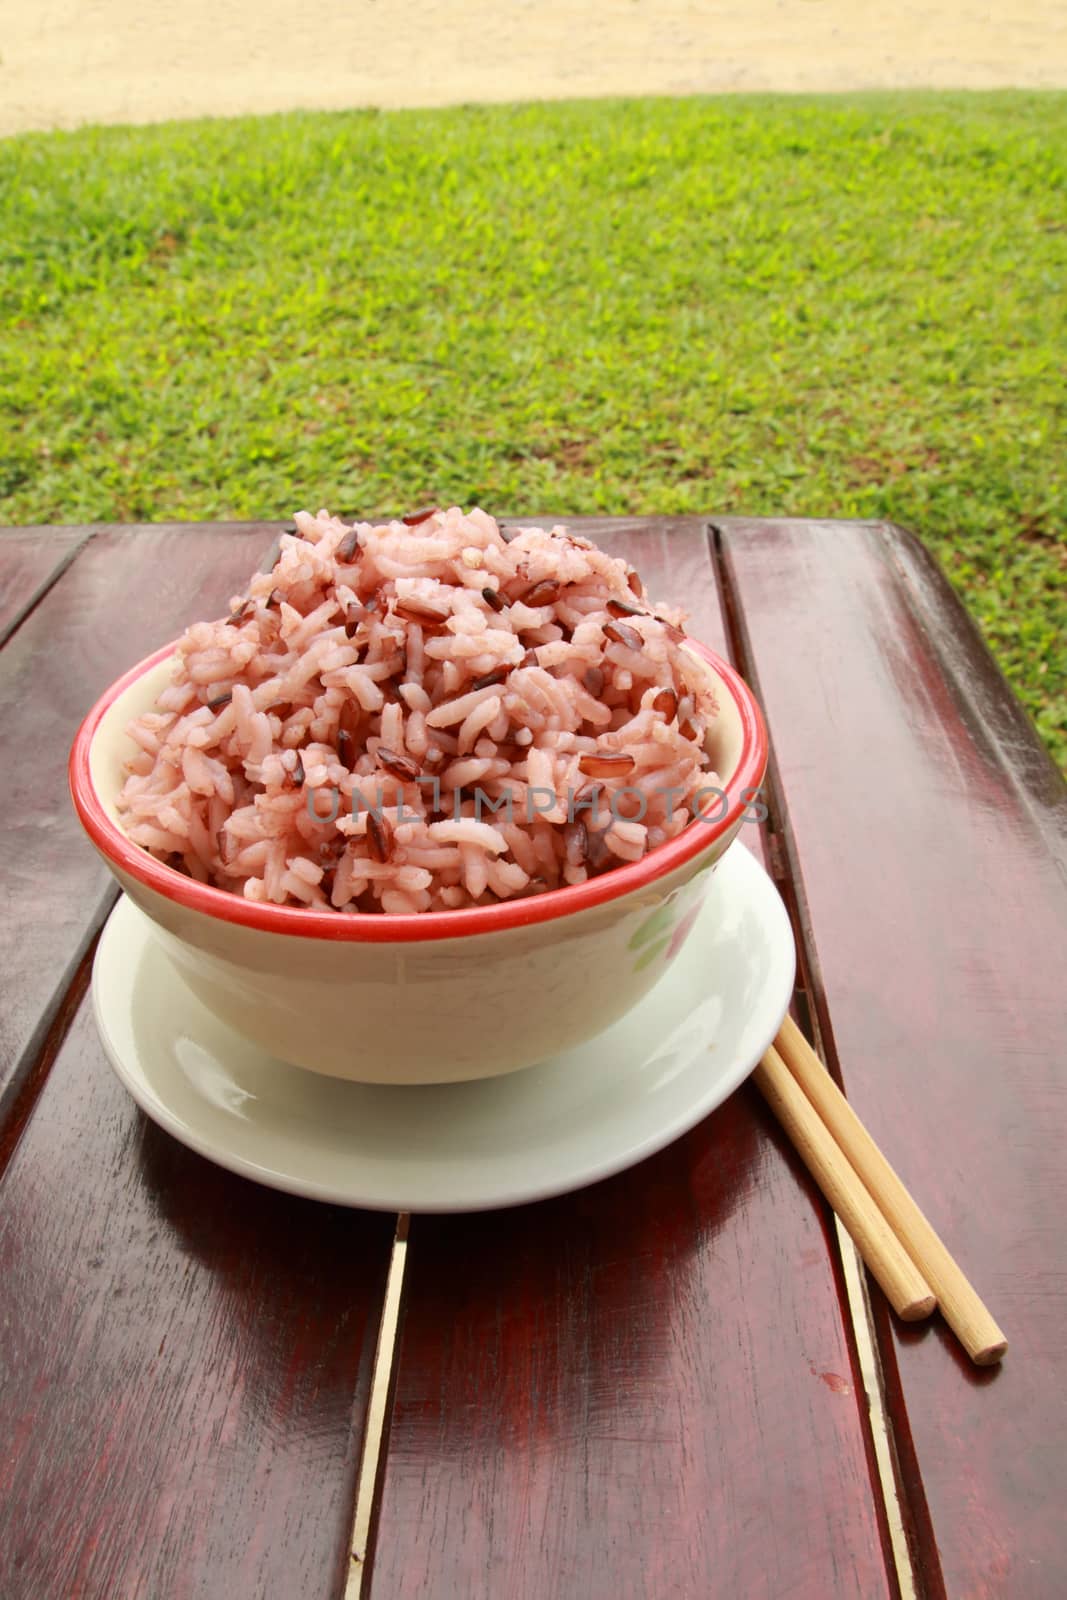 The bowl of cooked purple rice on the table.